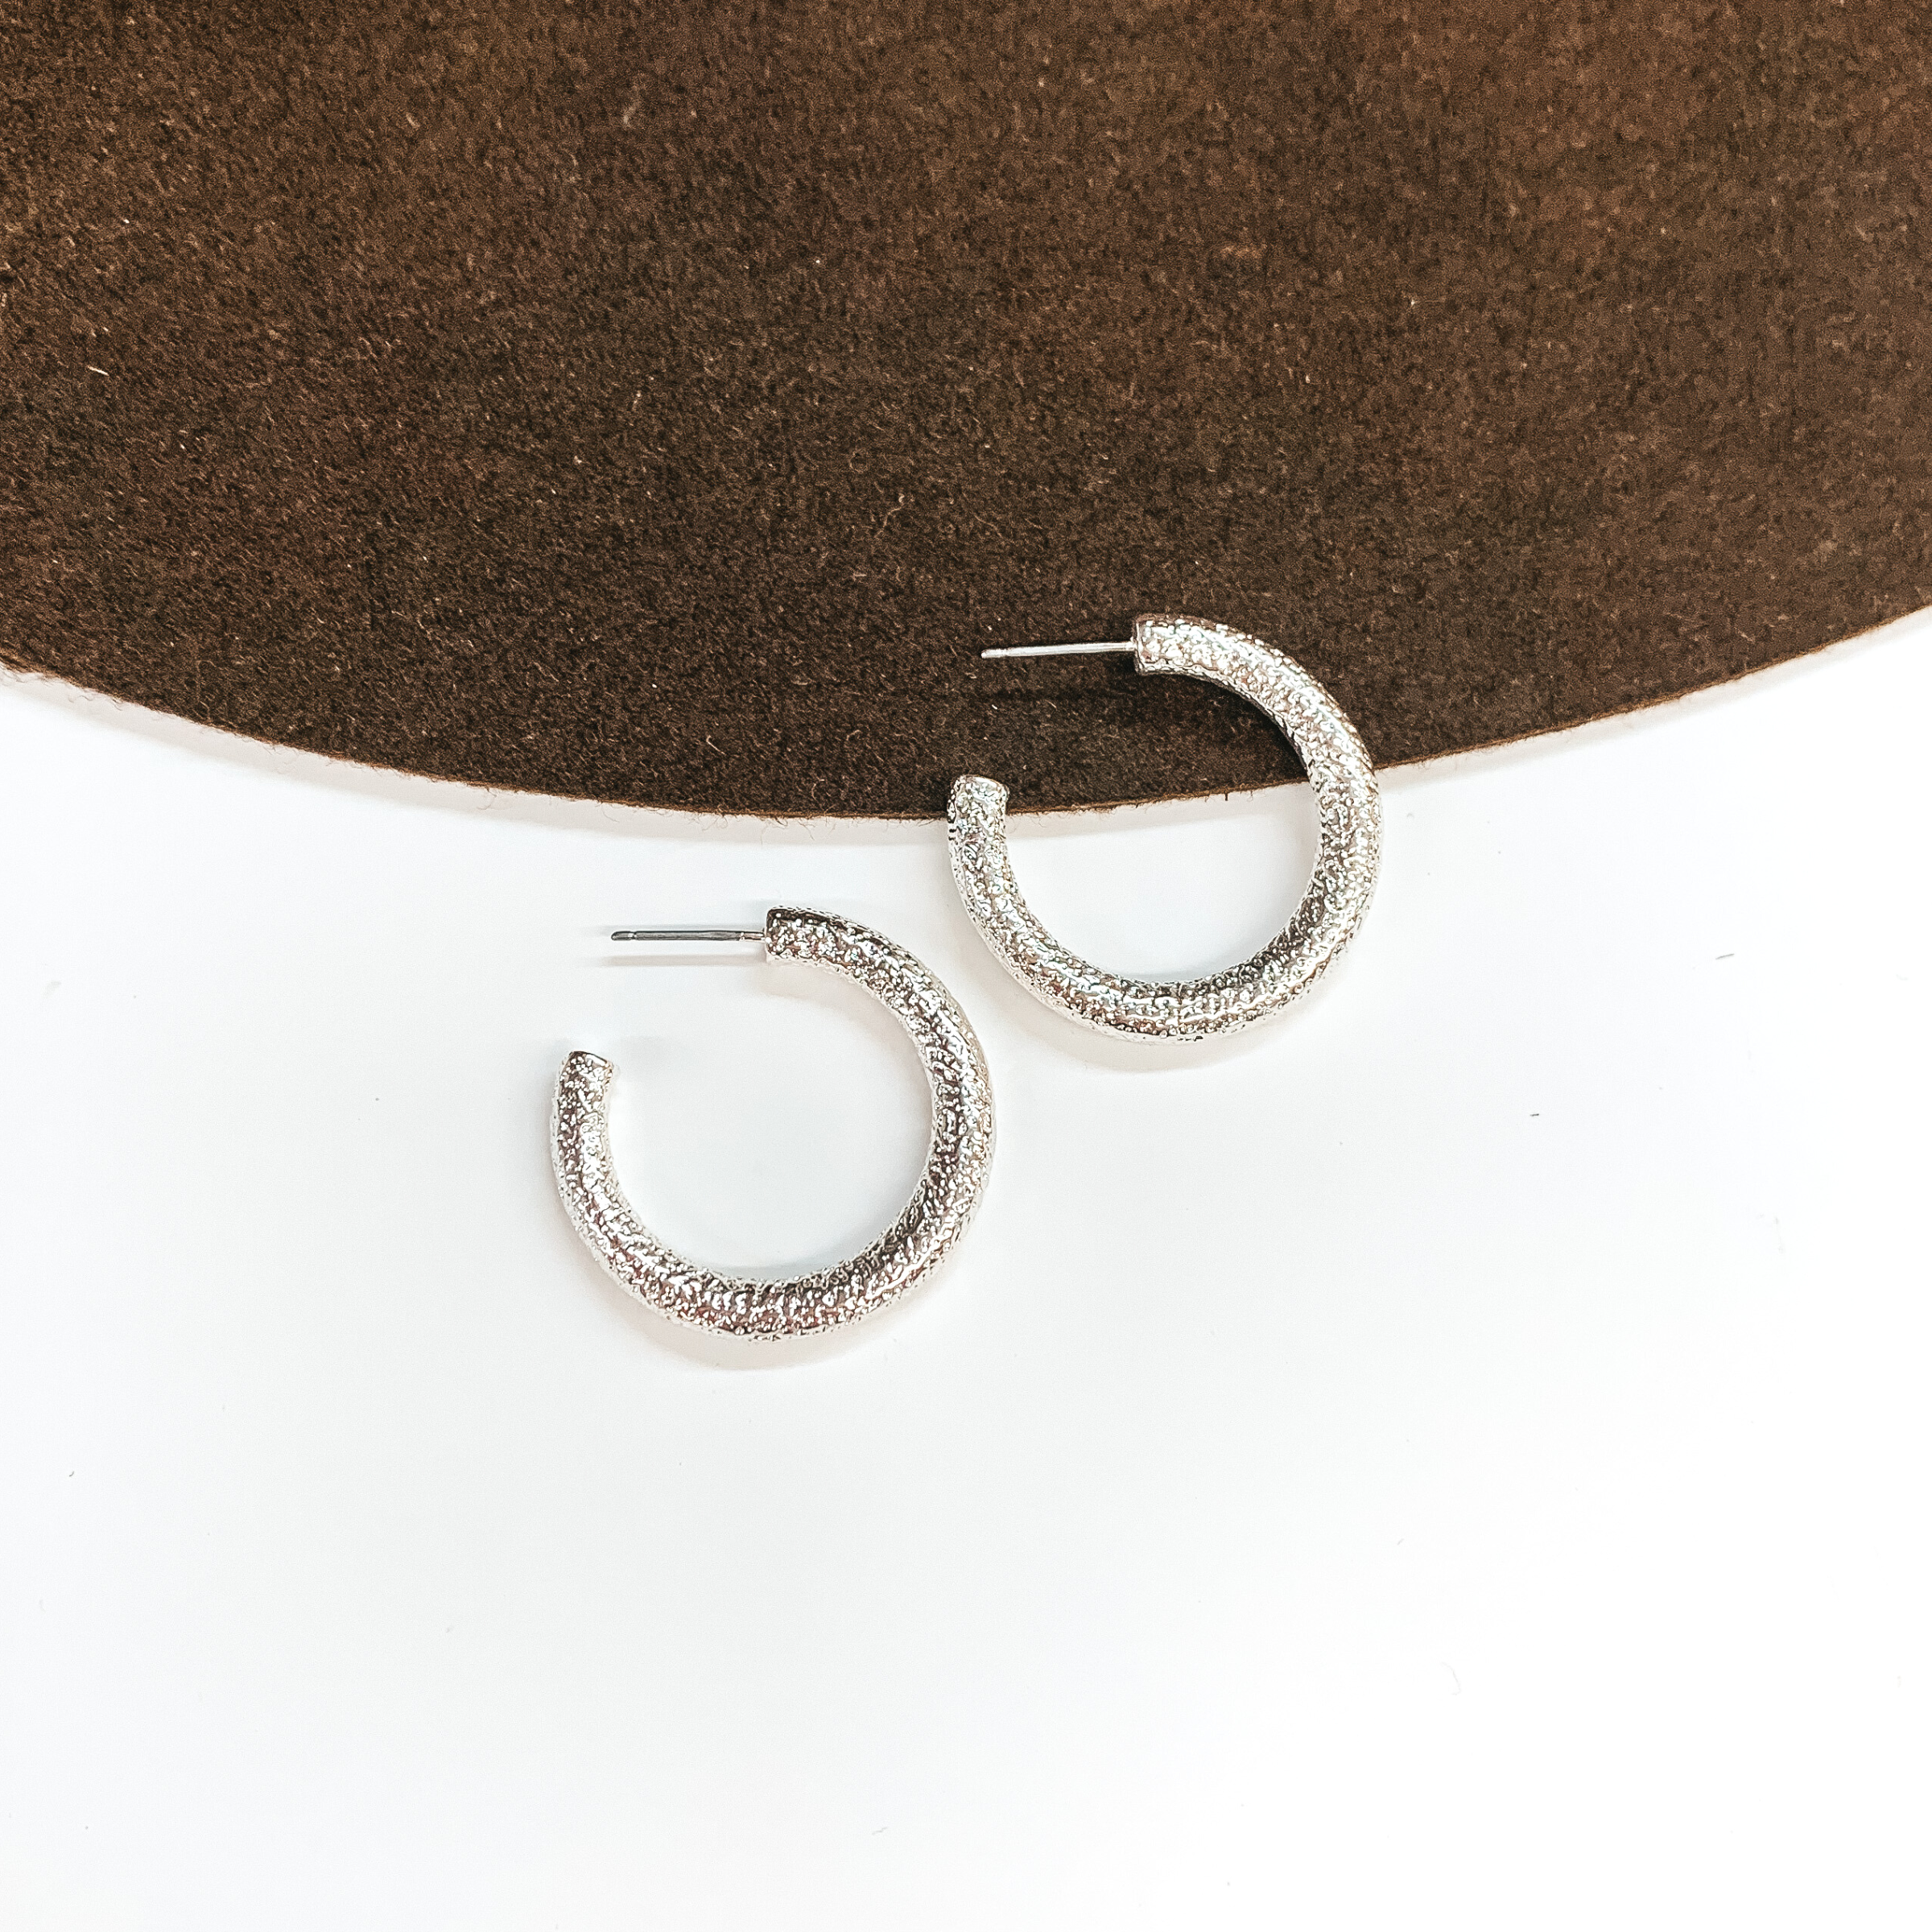 Textured Small Sized Hoop Earrings in Silver - Giddy Up Glamour Boutique